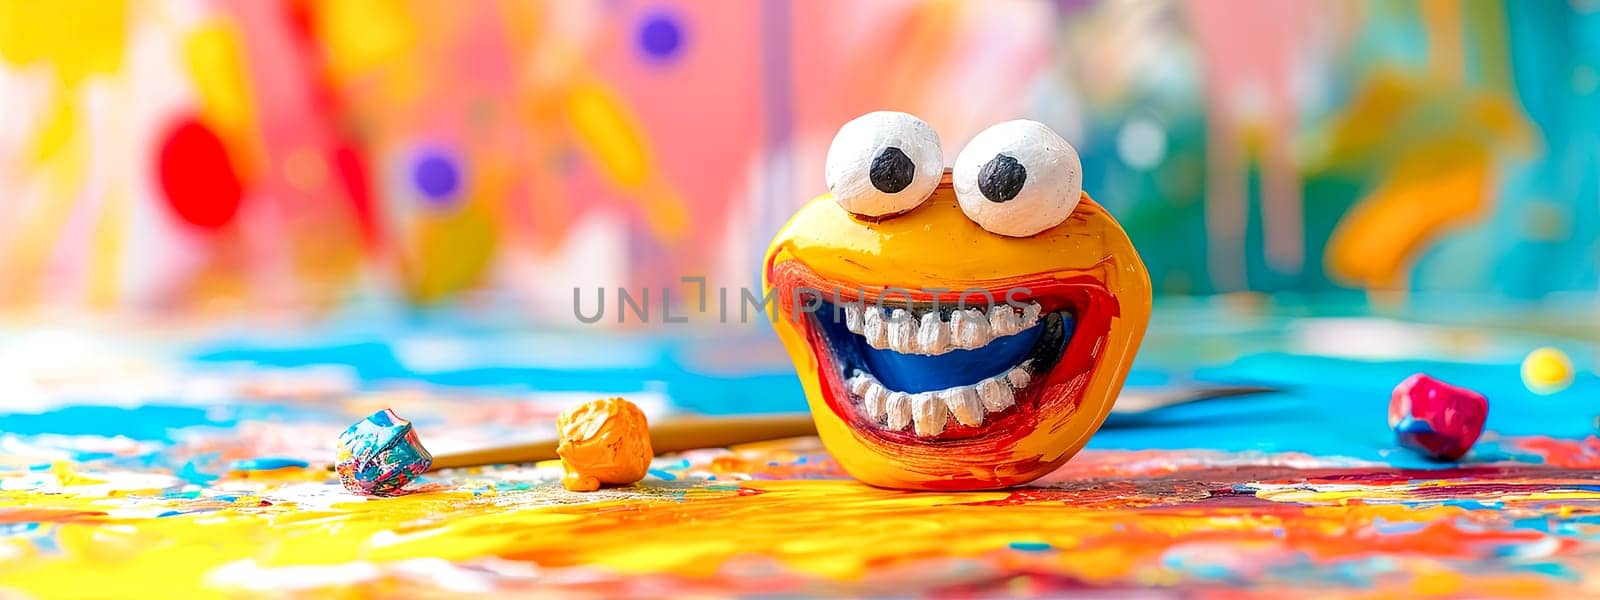 smiling face painted on a rounded object, surrounded by artistic chaos of paint splatters and creative tools by Edophoto